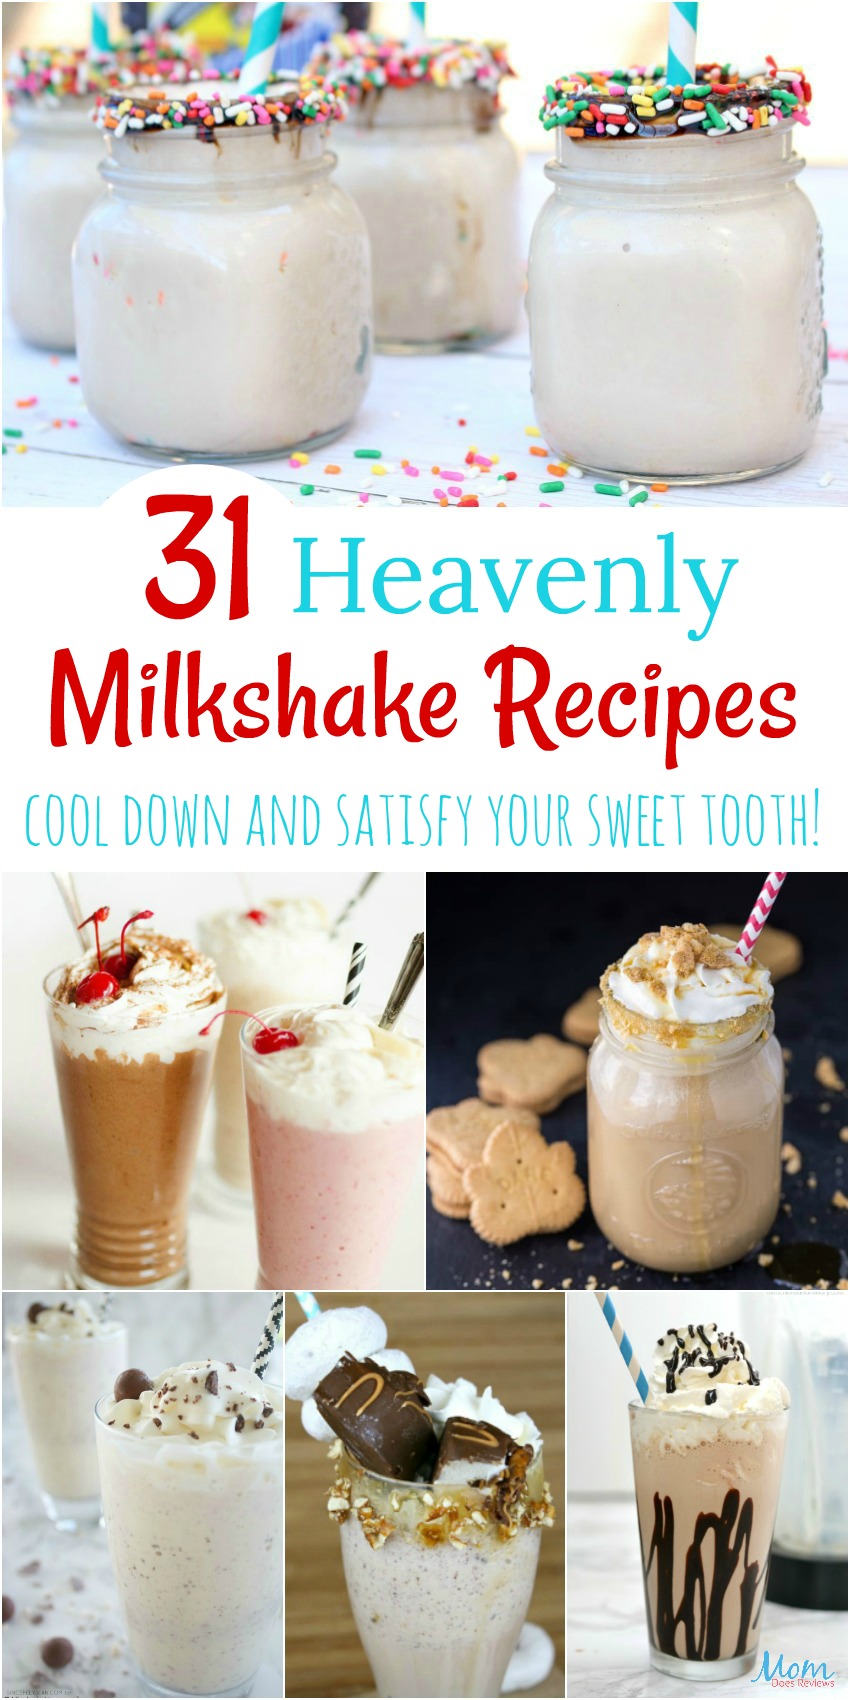 31 Heavenly Milkshake Recipes that will Cool You Down and Satisfy Your Sweet Tooth